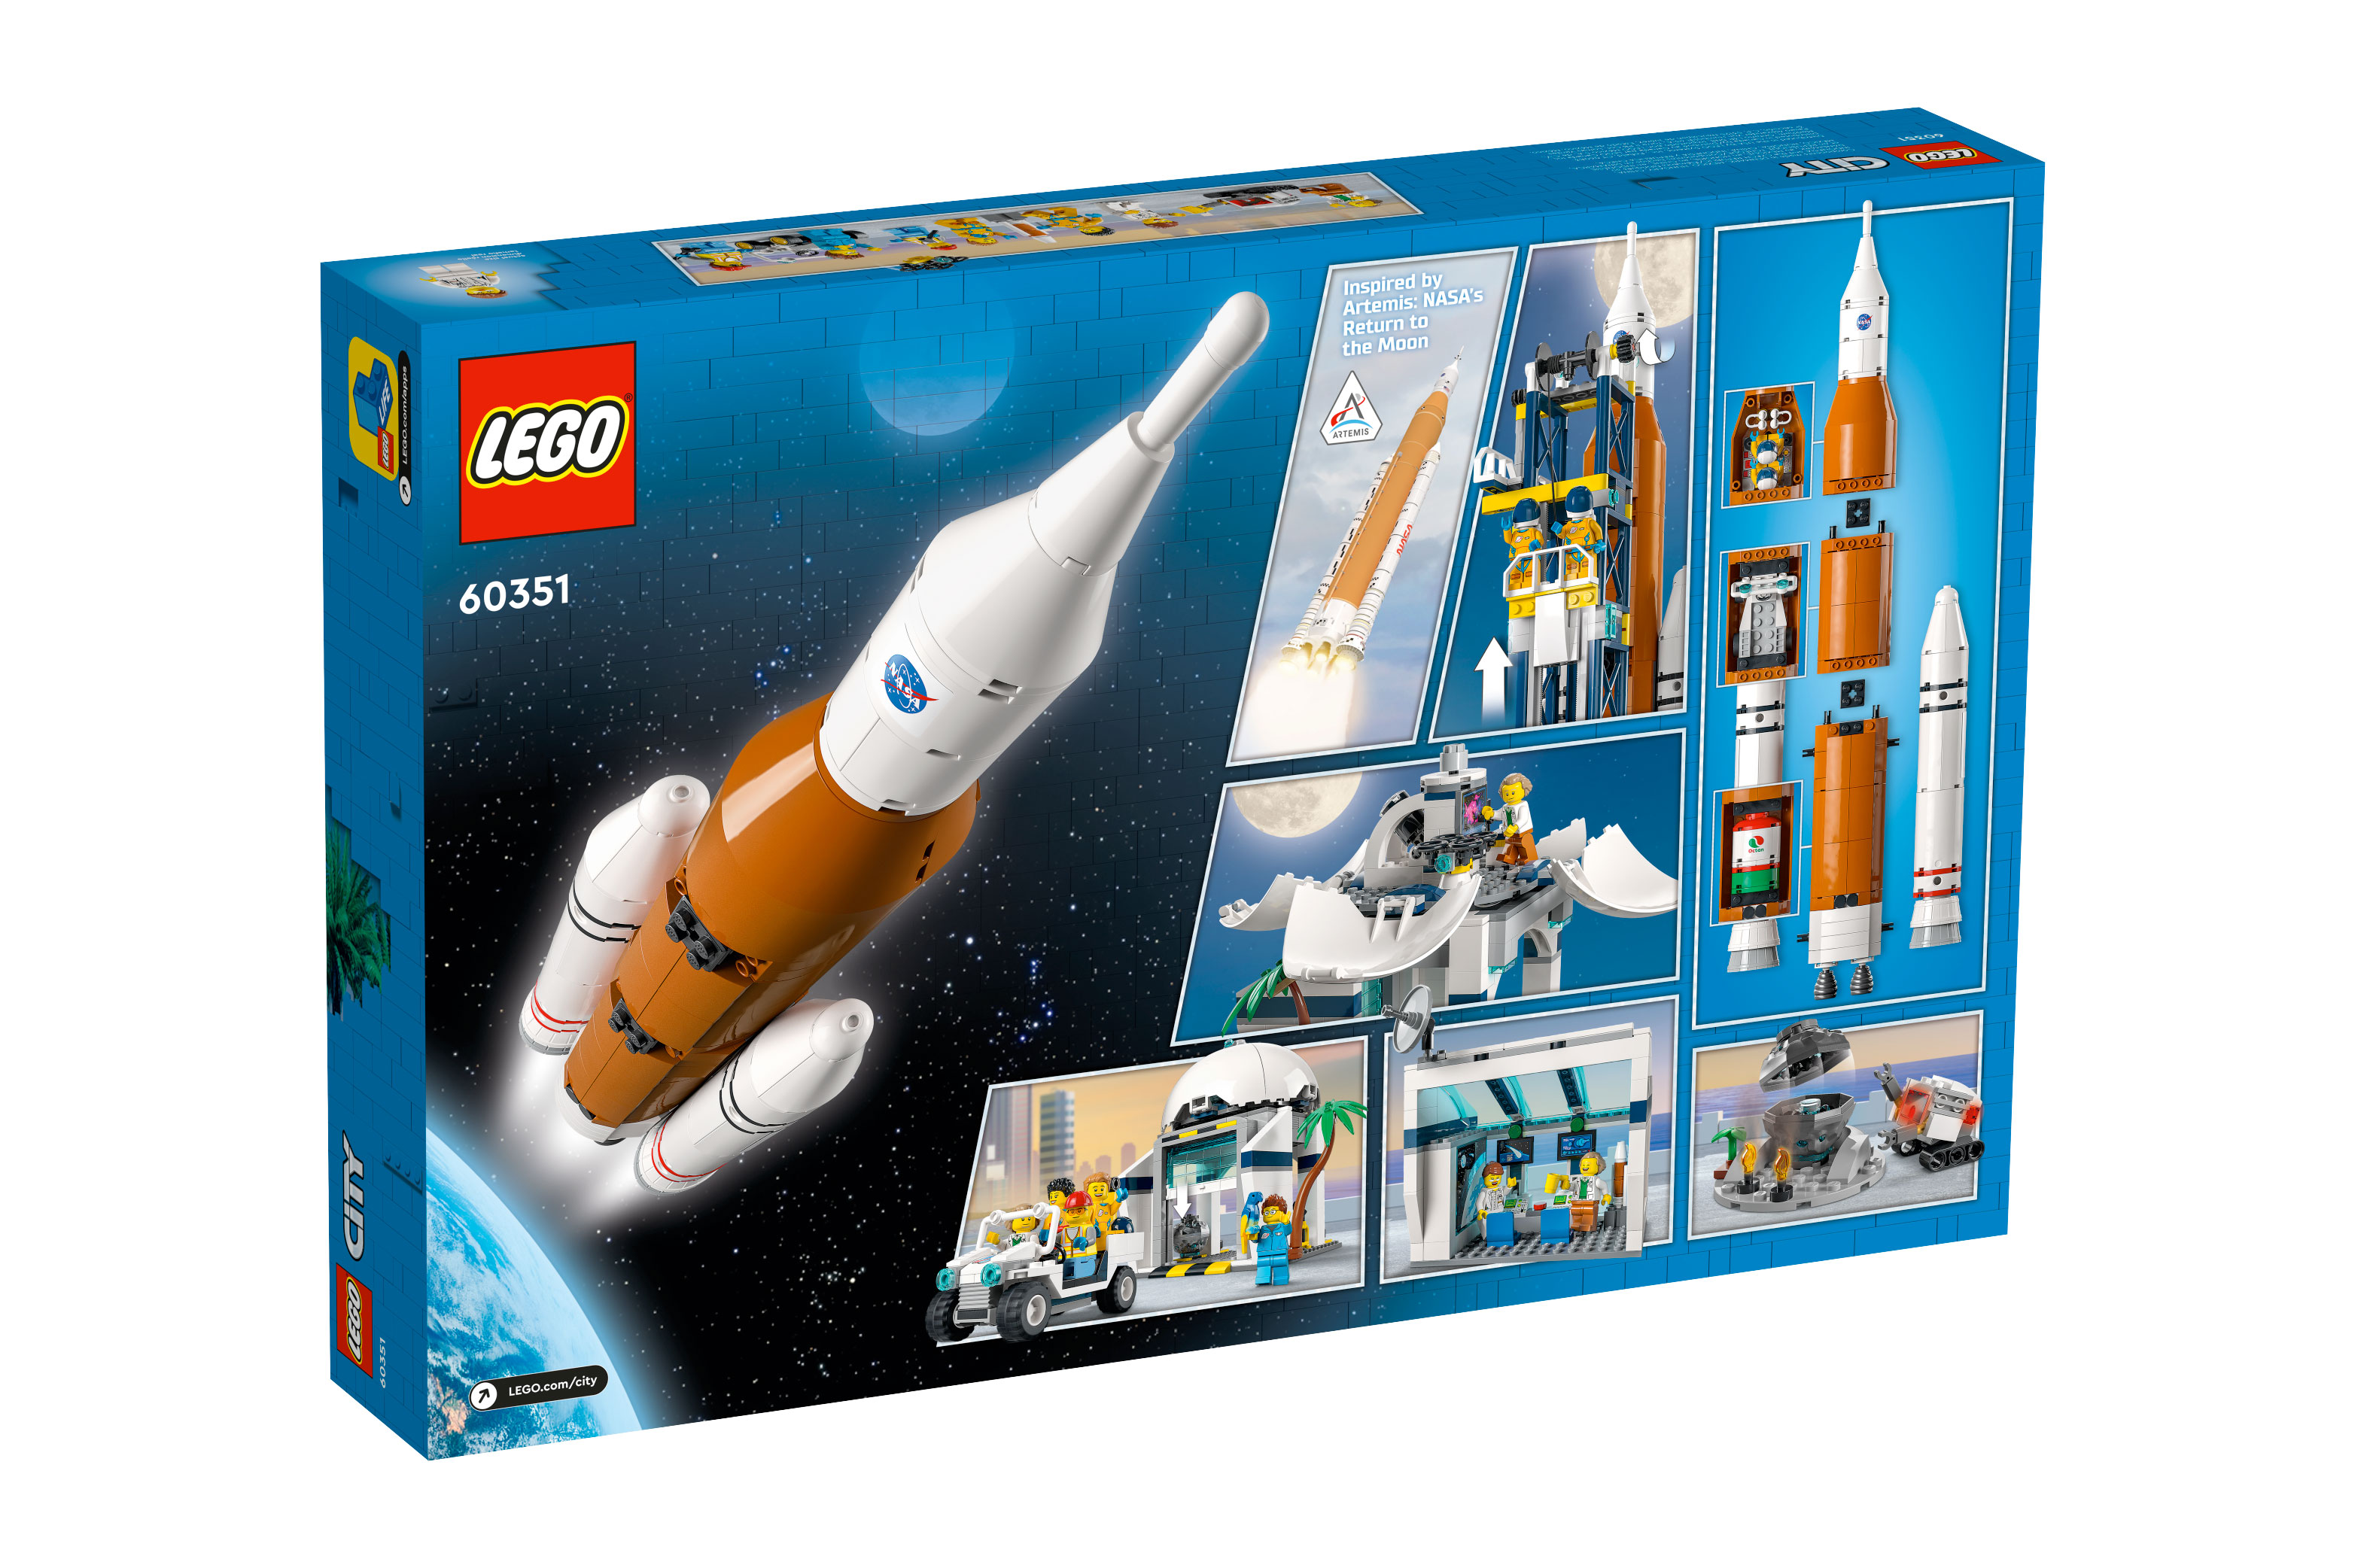 LEGO rolls out Artemis toy sets ahead of new NASA moon missions